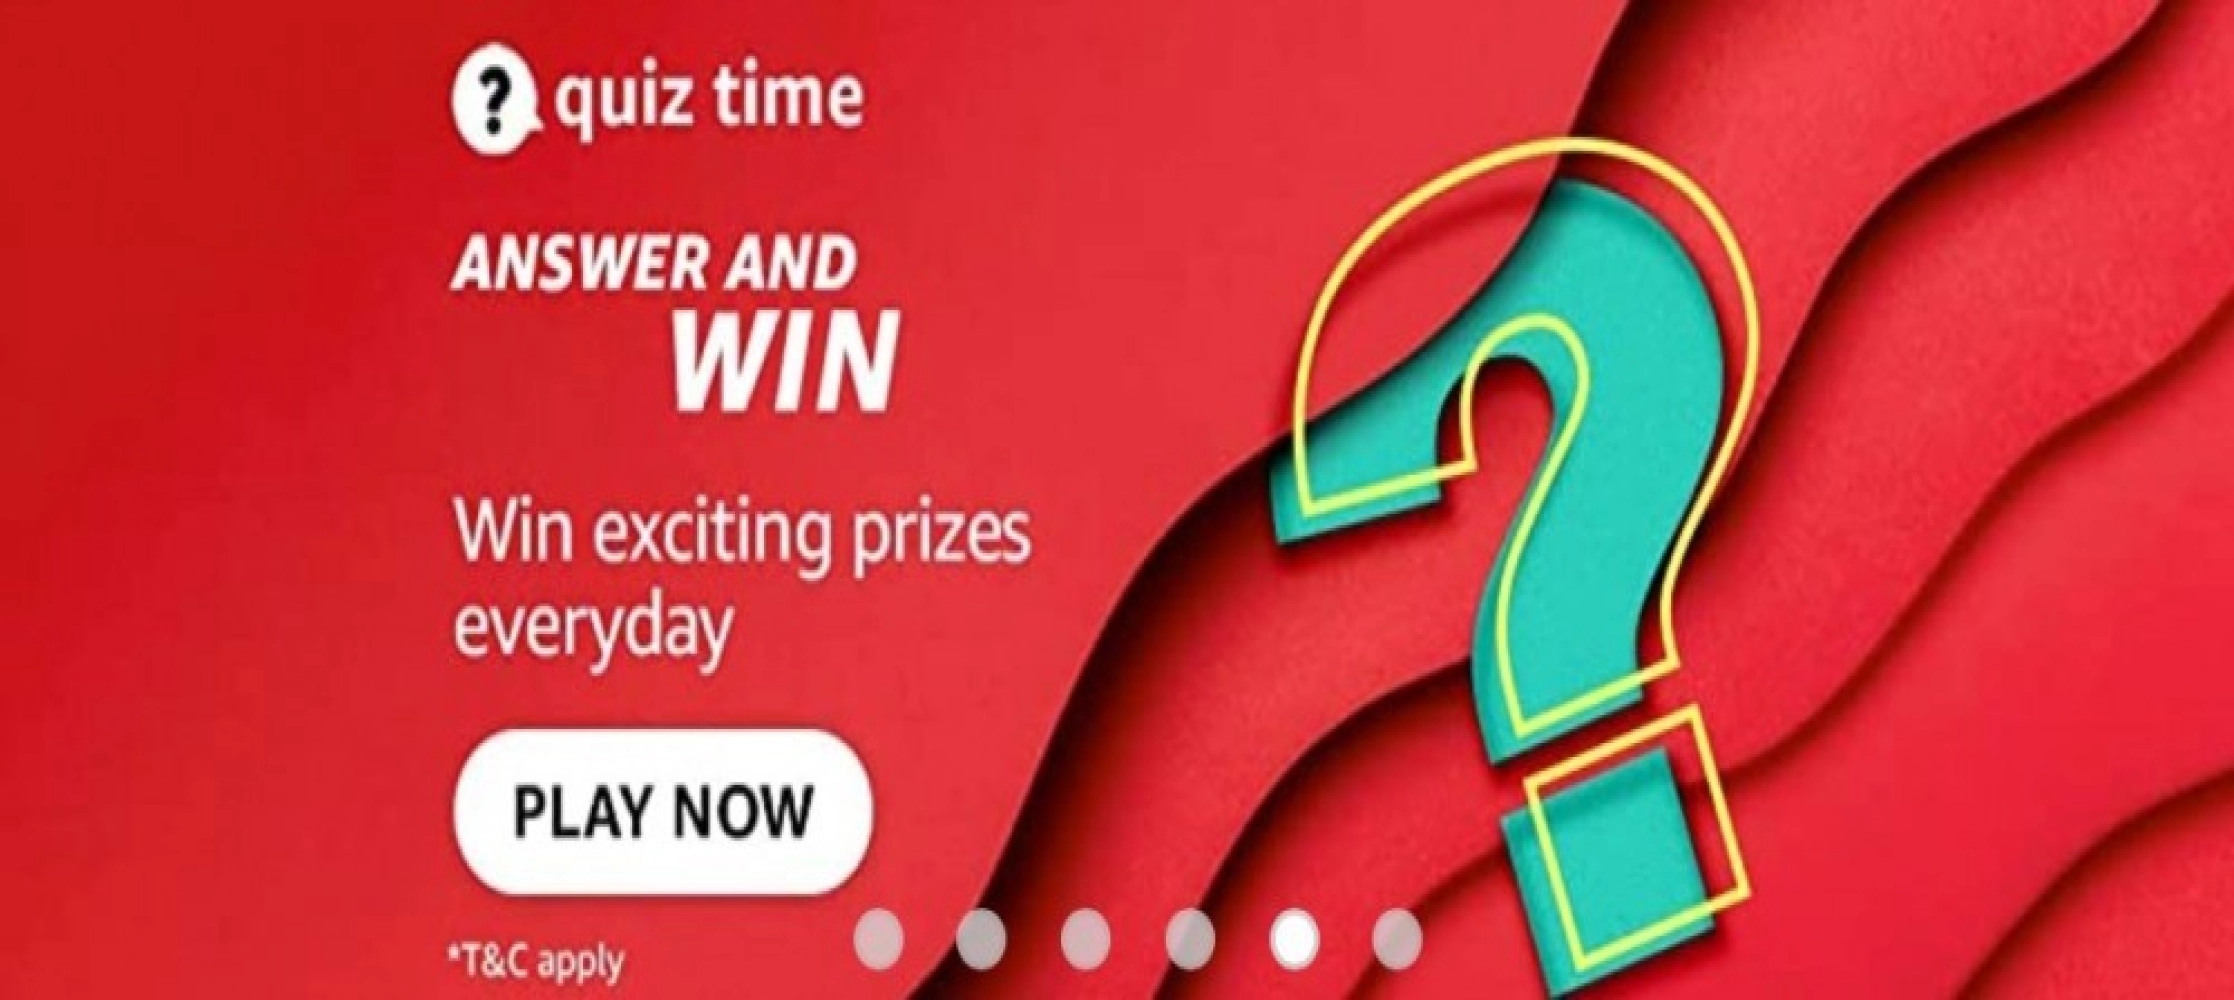 AMAZON QUIZ CONTEST: 6 MAY, 2022 - ANSWER TODAY FOR THE QUESTIONS AND GET A CHANCE TO WIN AMAZON PAY RS.1,000